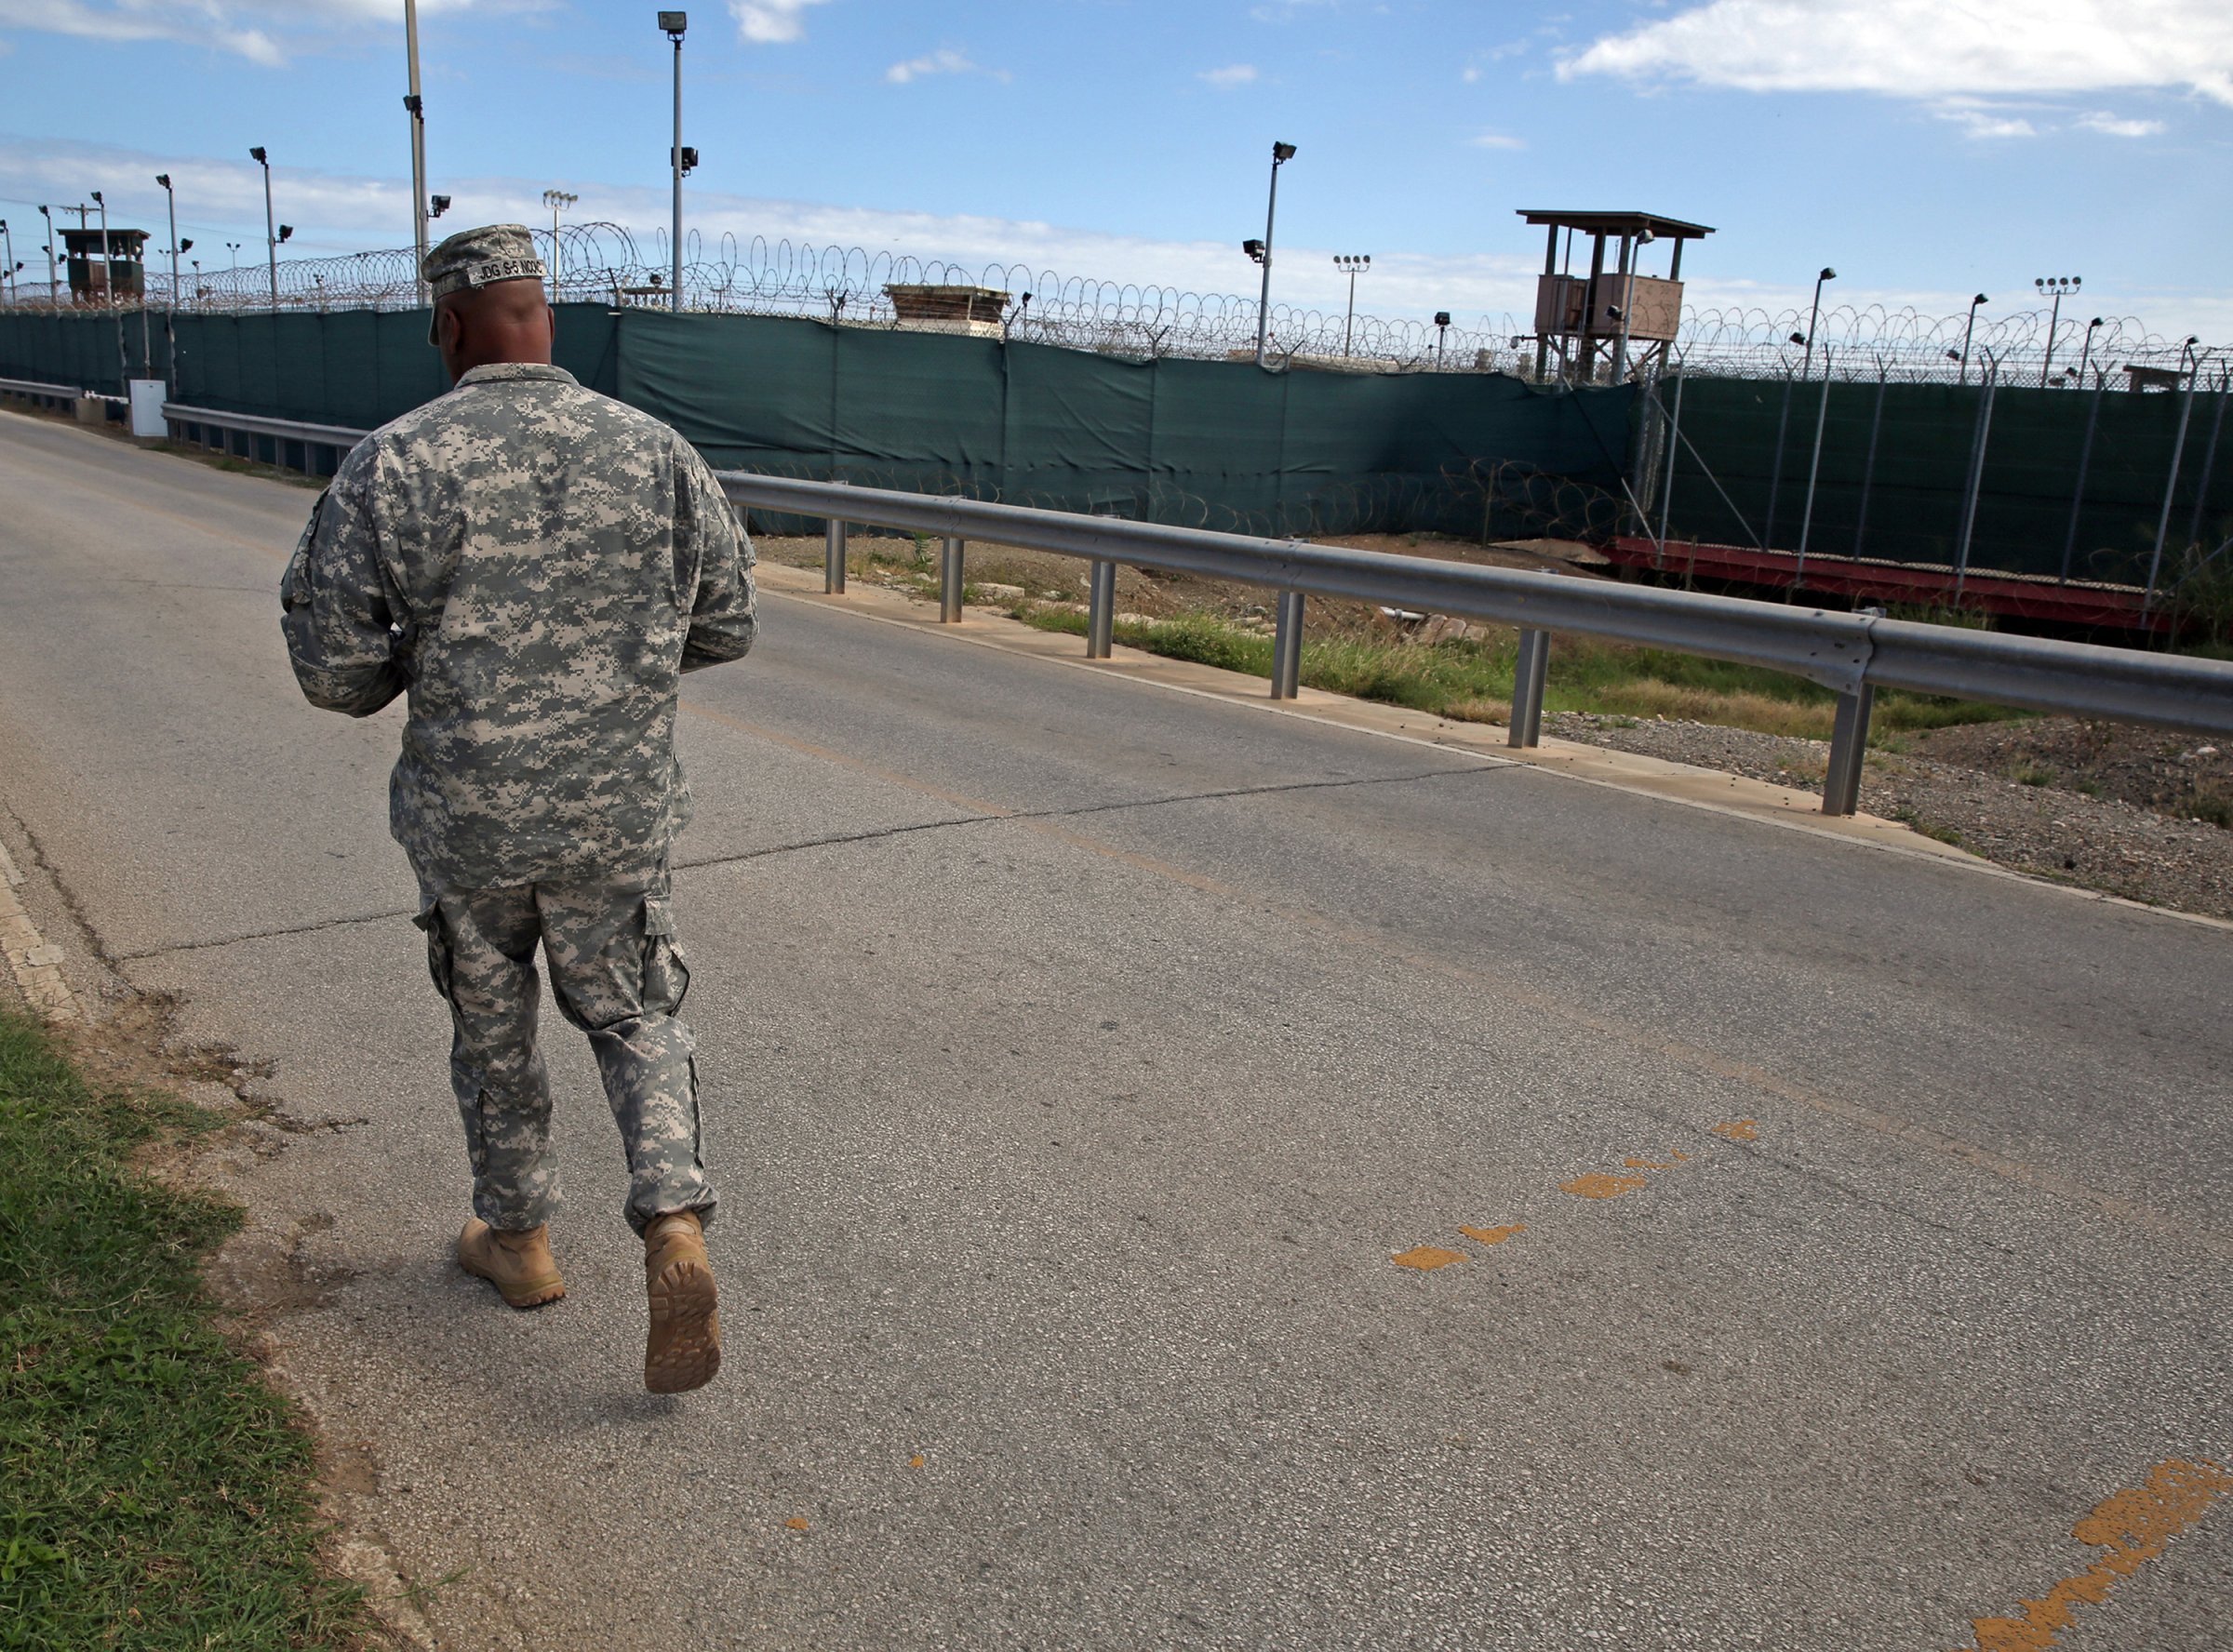 Detention at Guantanamo grinds on: 13 years and counting, 148 captives remain